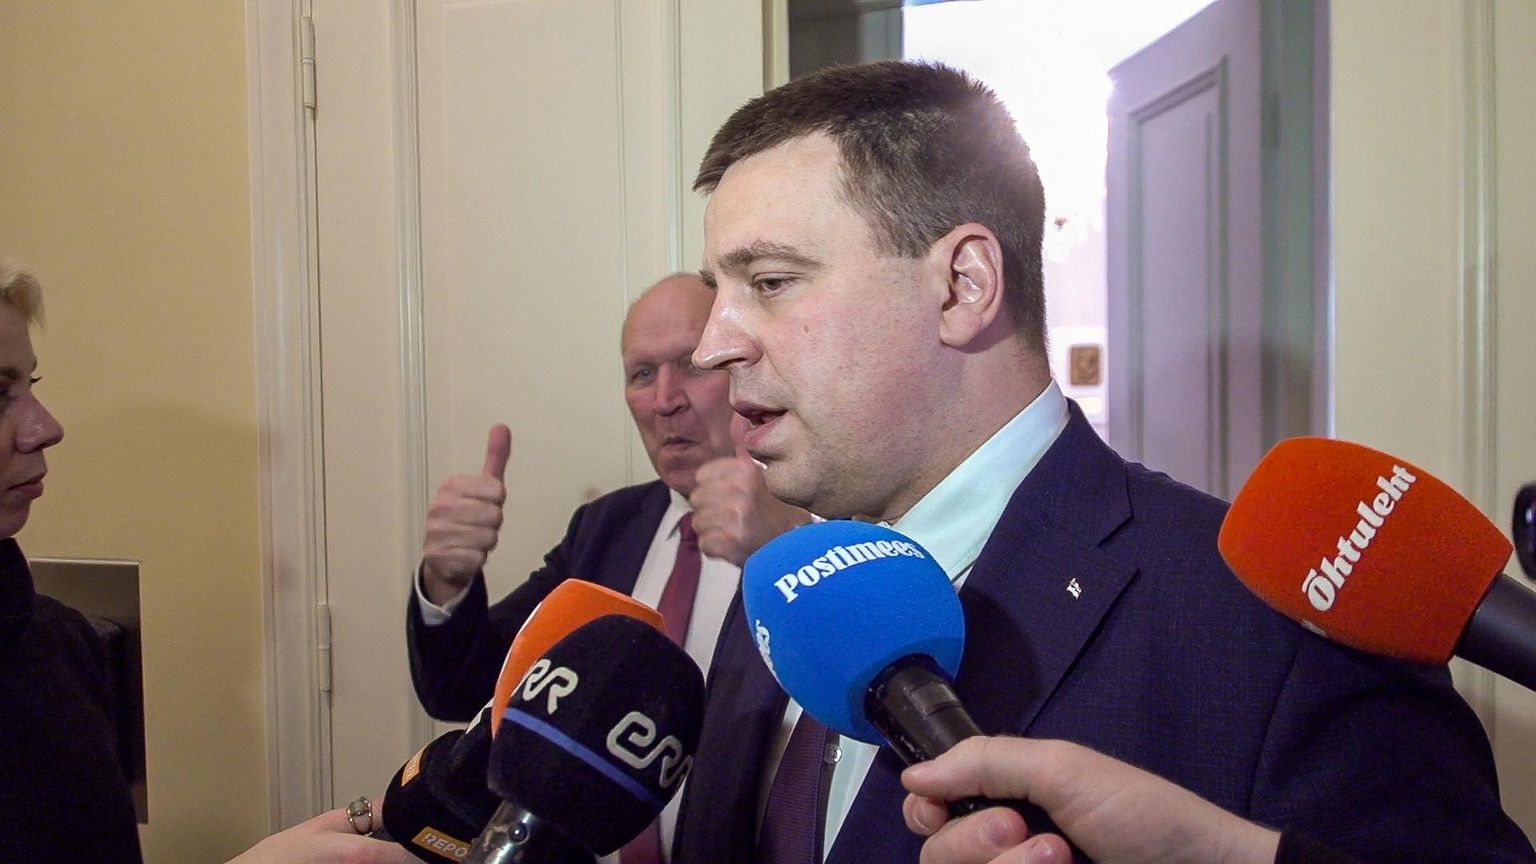 Prime Minister Jüri Ratas said that Helme’s resignation was a step of considerable political significance that allowed the coalition to stay together.